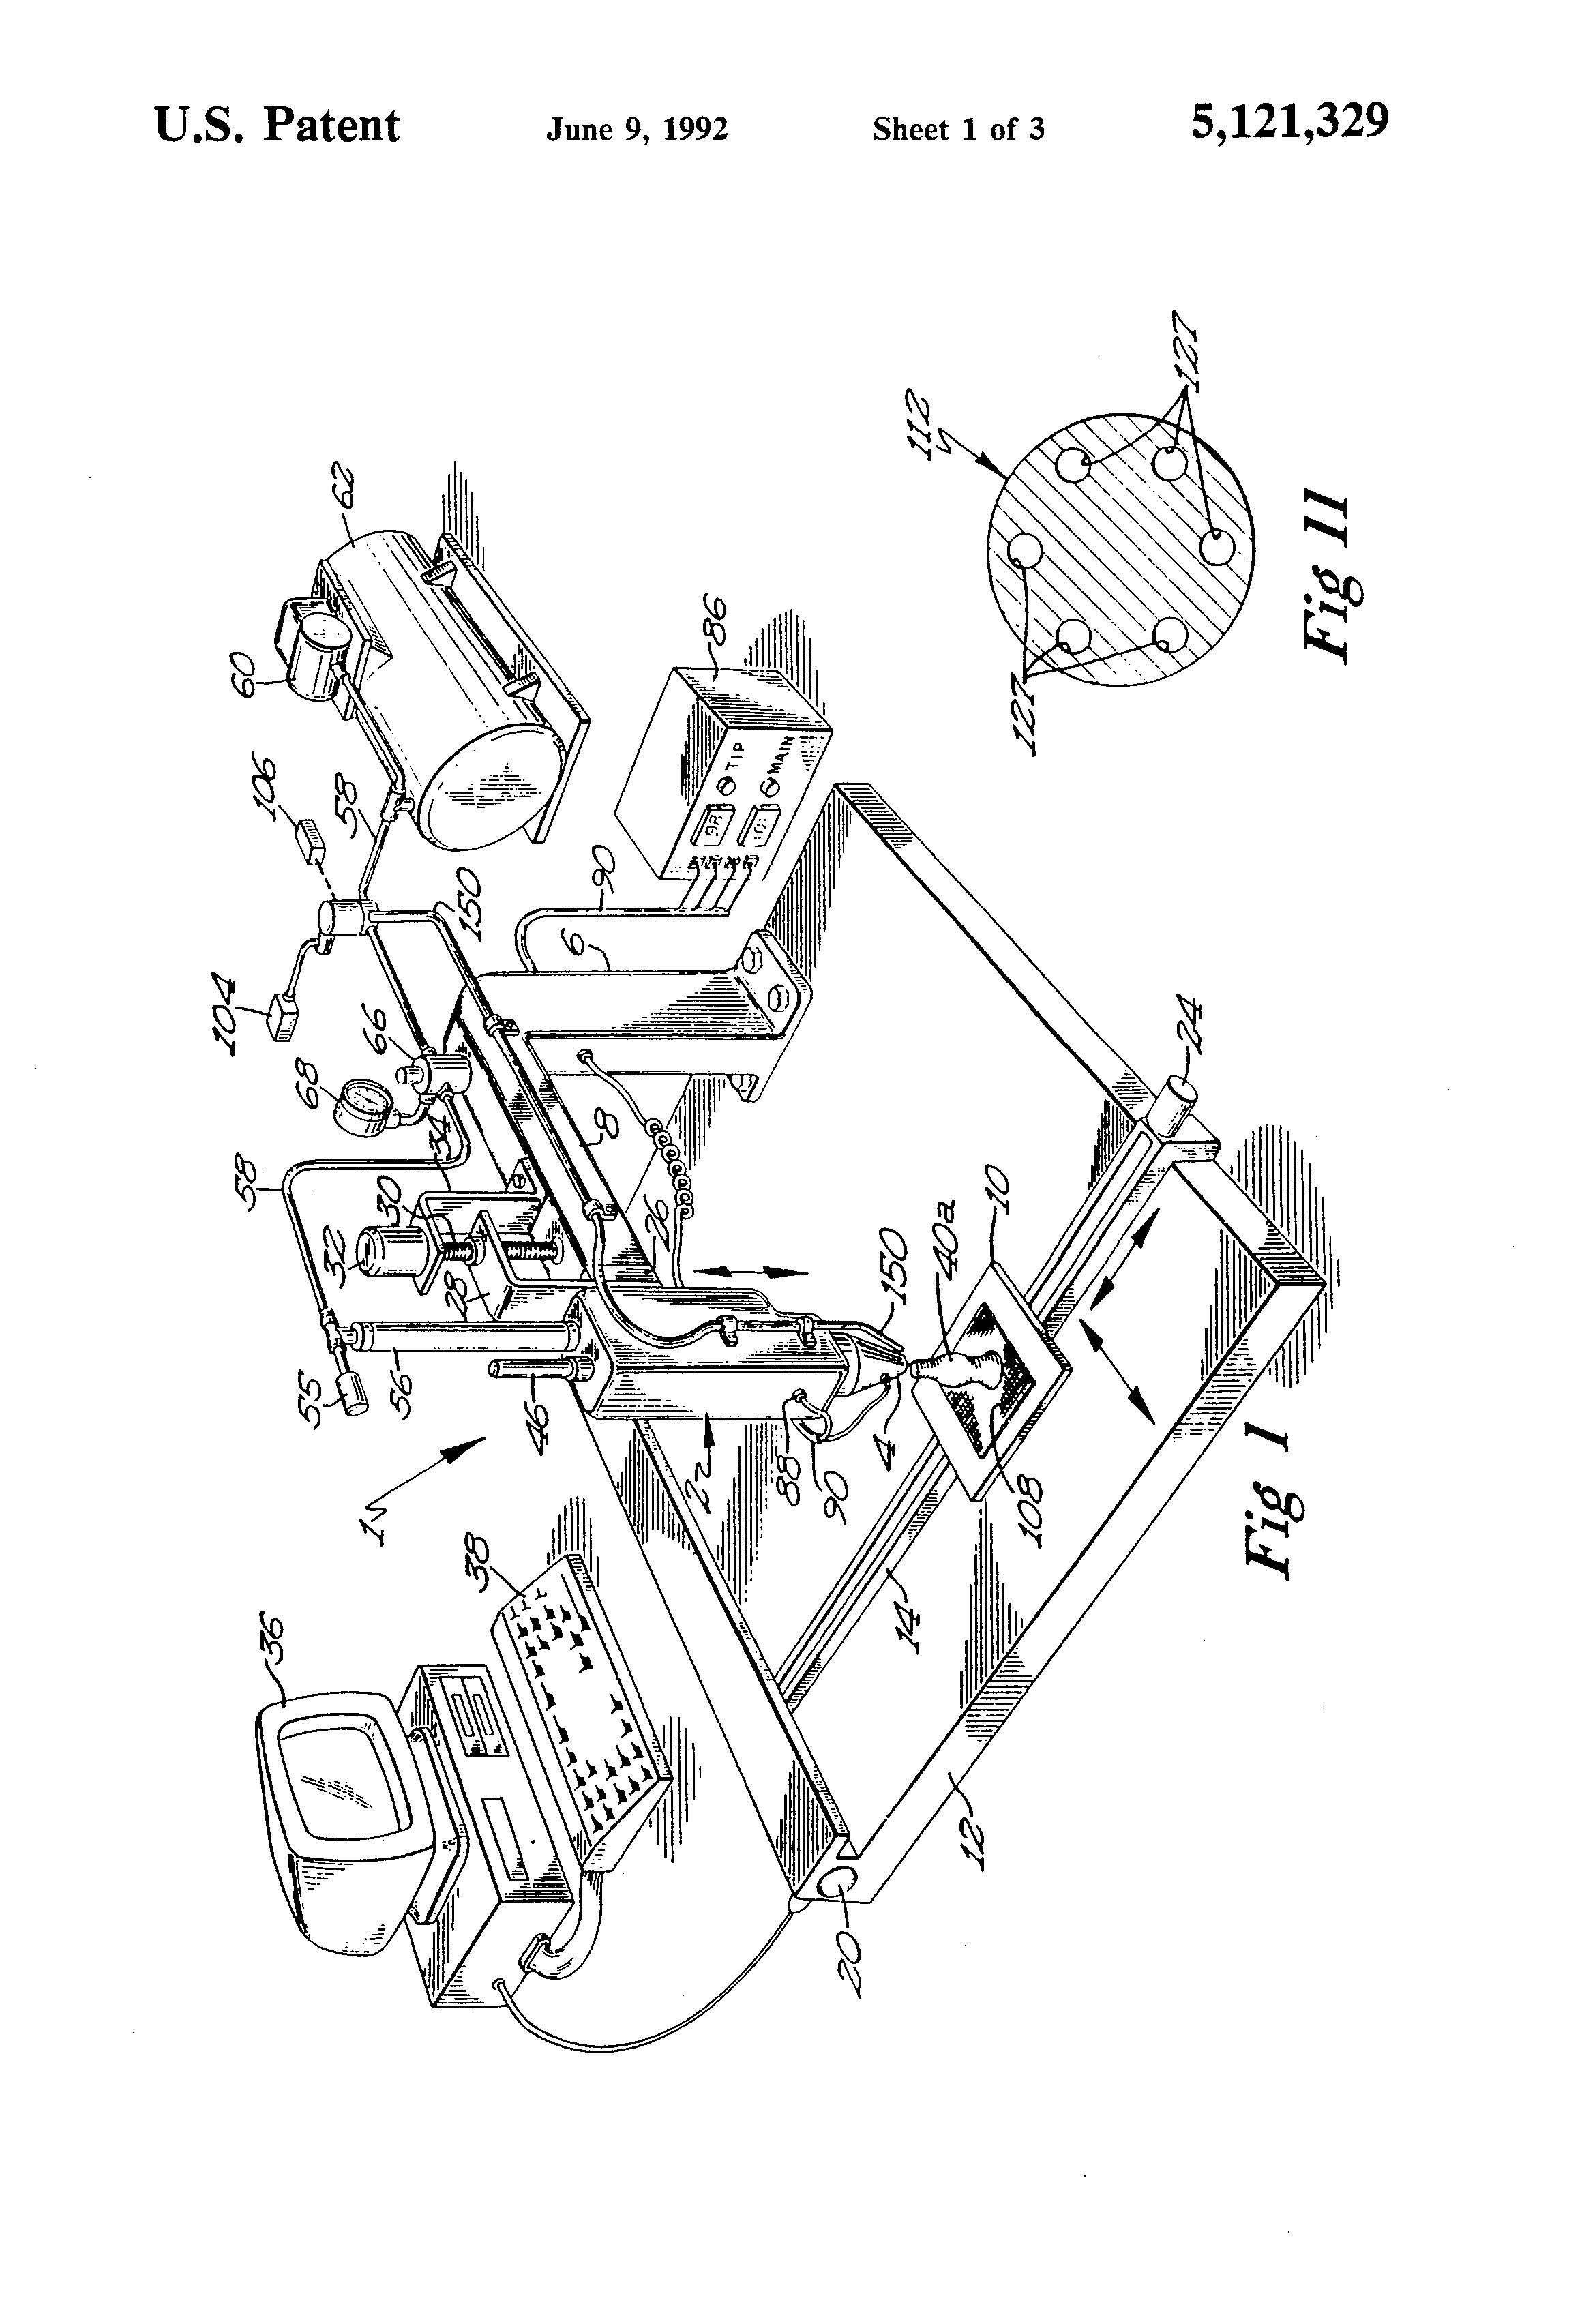 Creating 3d objects patent